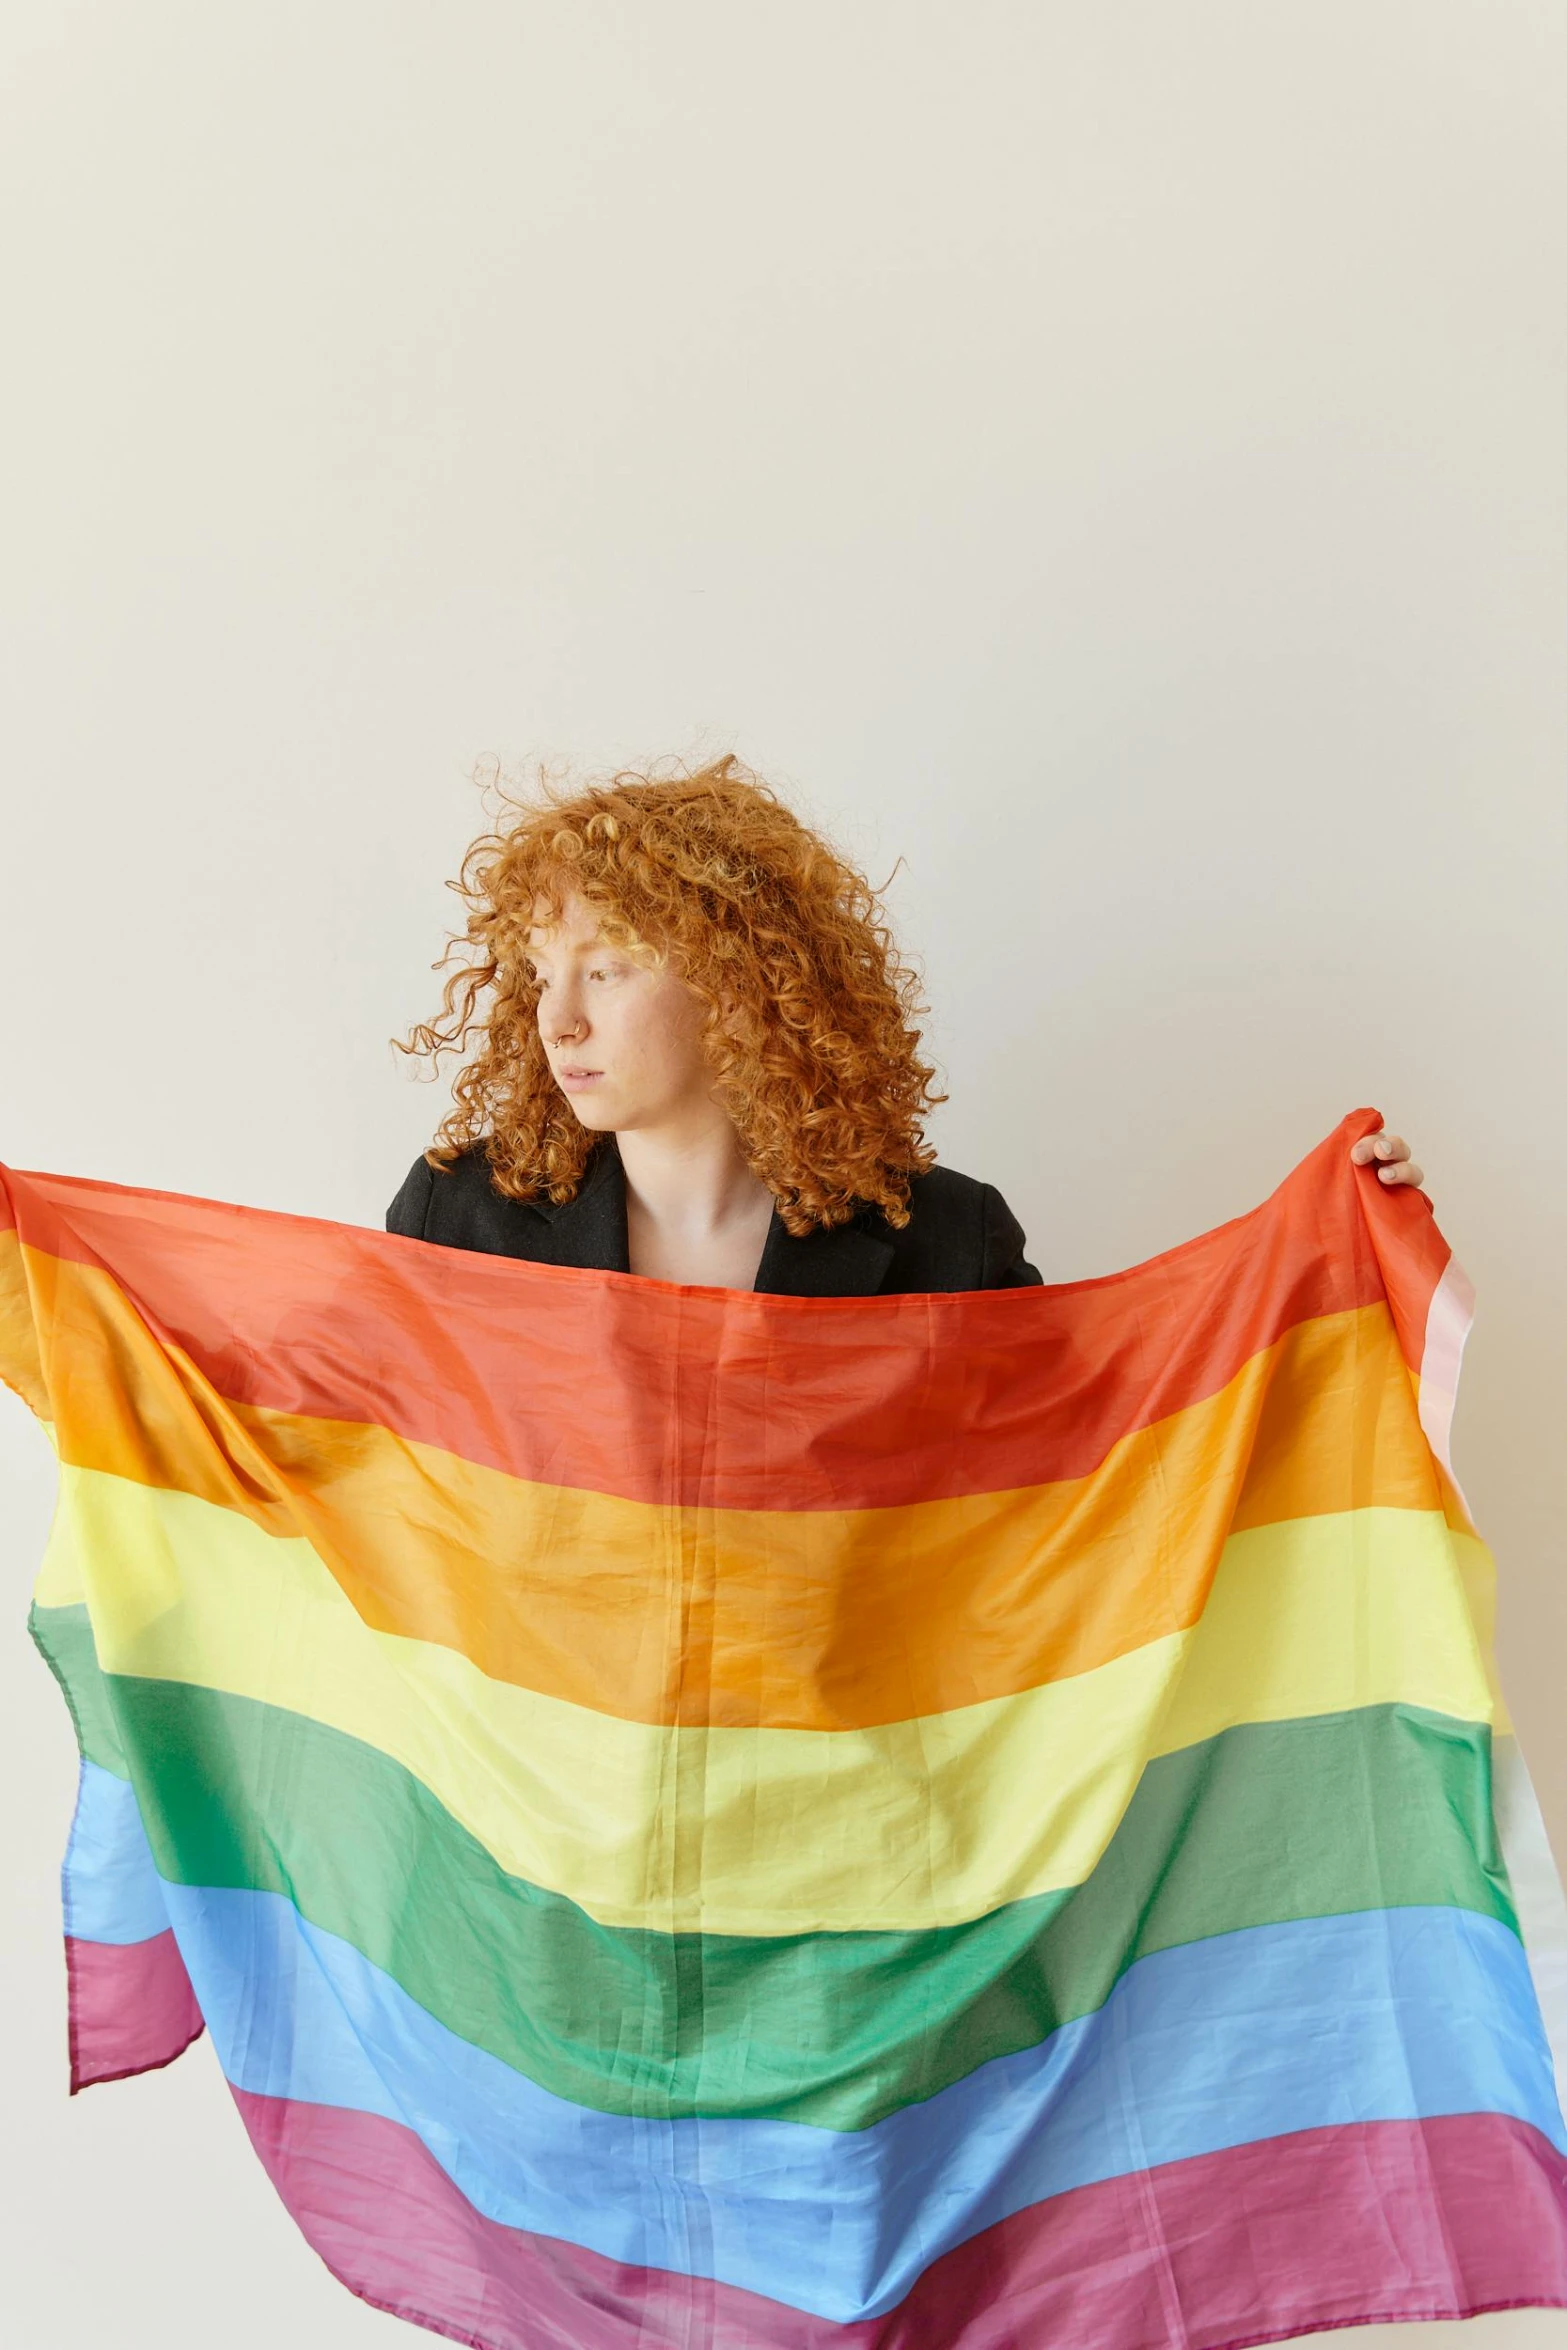 a woman holding up a rainbow colored blanket, by Emily Mason, with curly red hair, holding a white flag, on a pale background, ignant